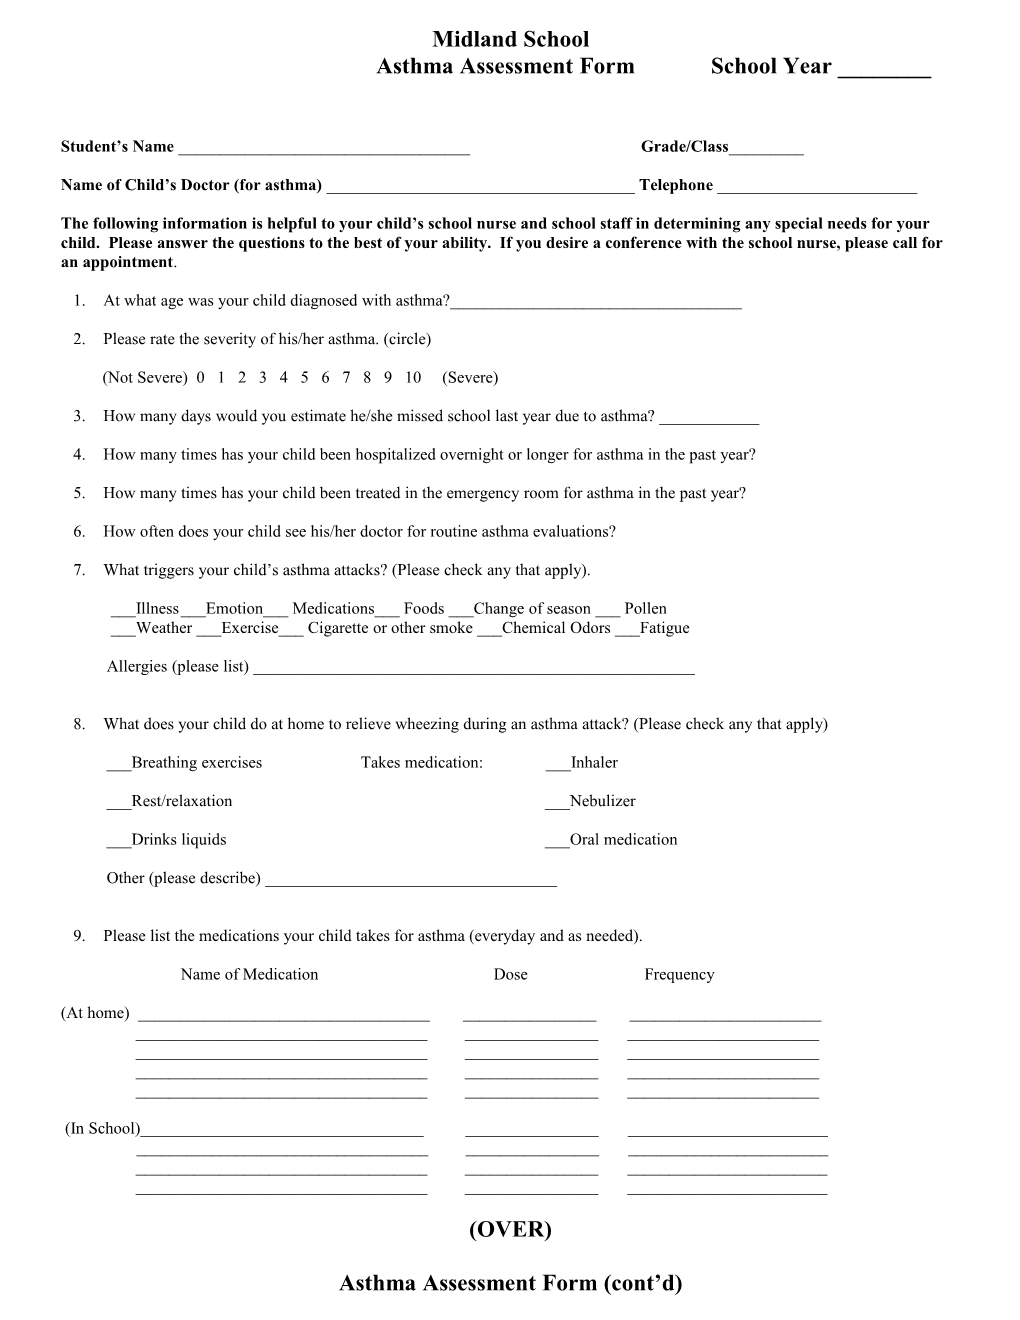 Questionaire for Parents of Child with Asthma